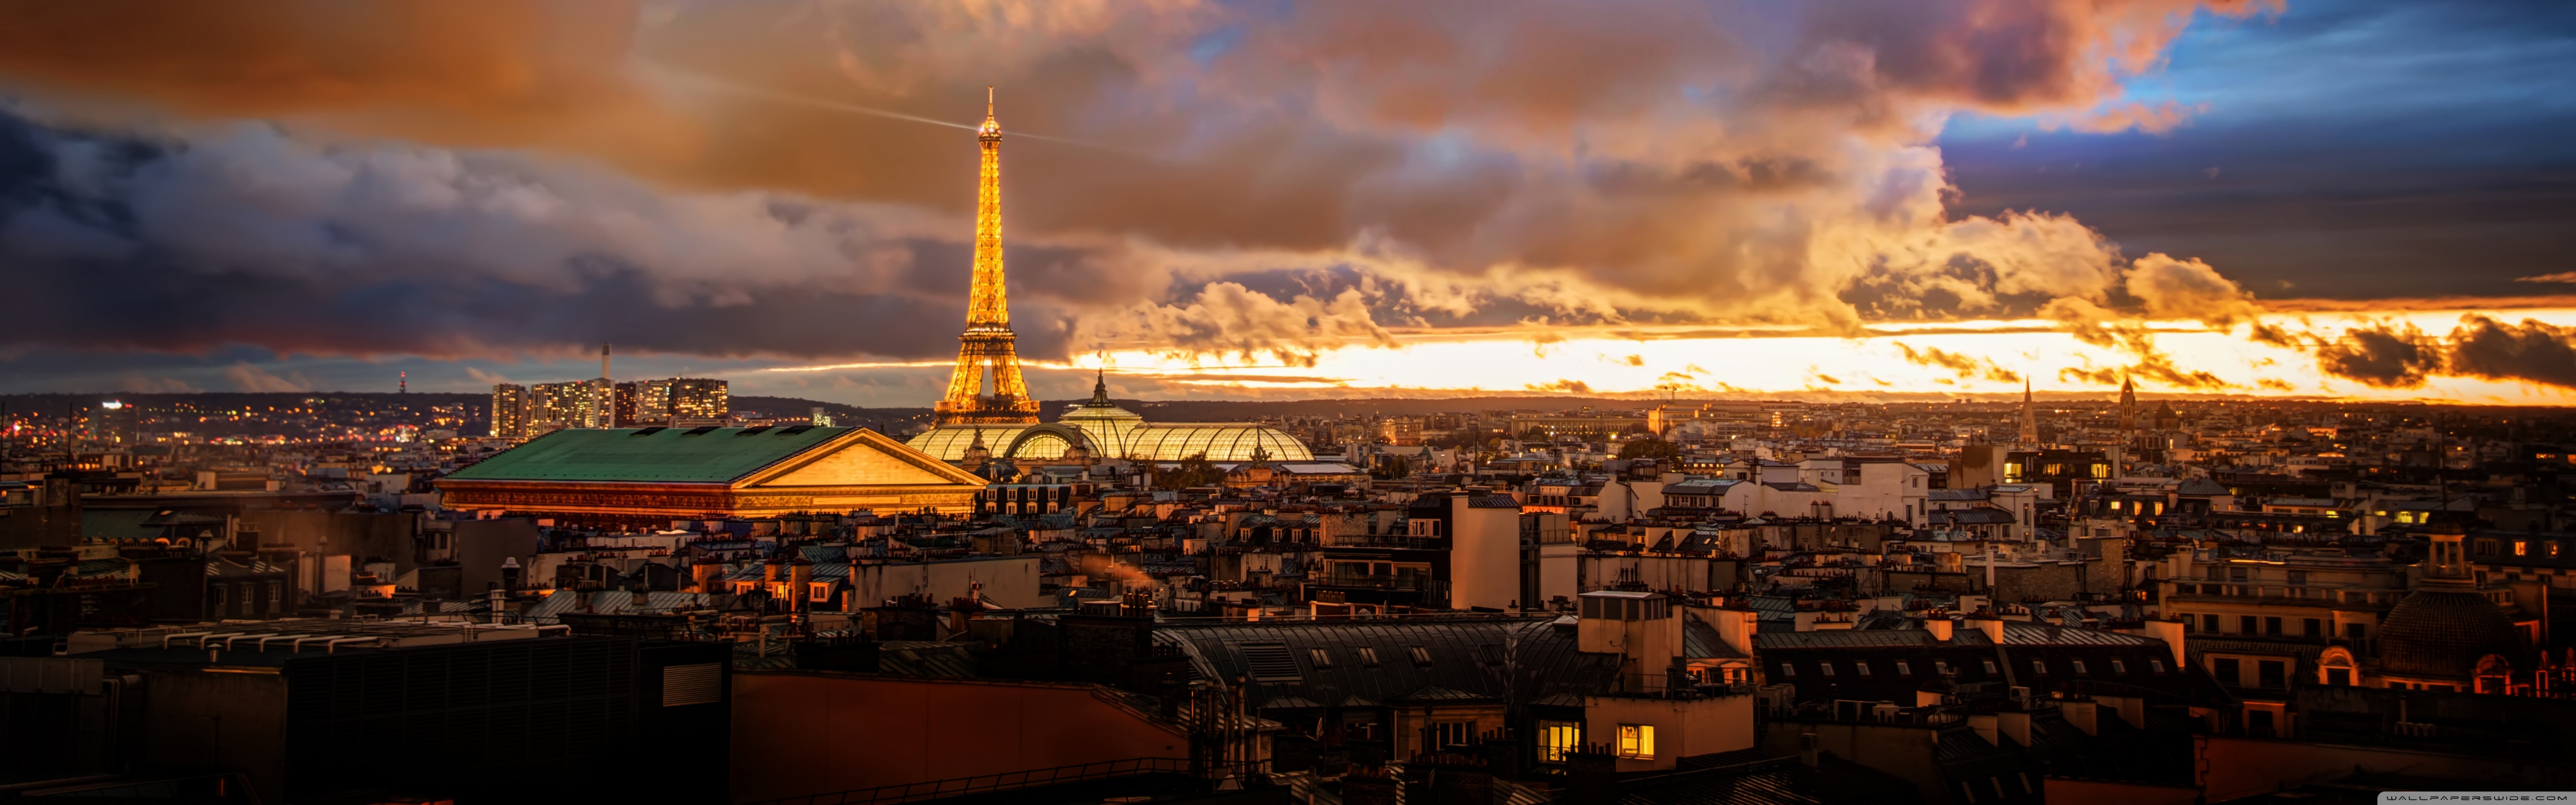 Eiffel Tower, Cityscape, Clouds, Night, Long exposure Wallpaper